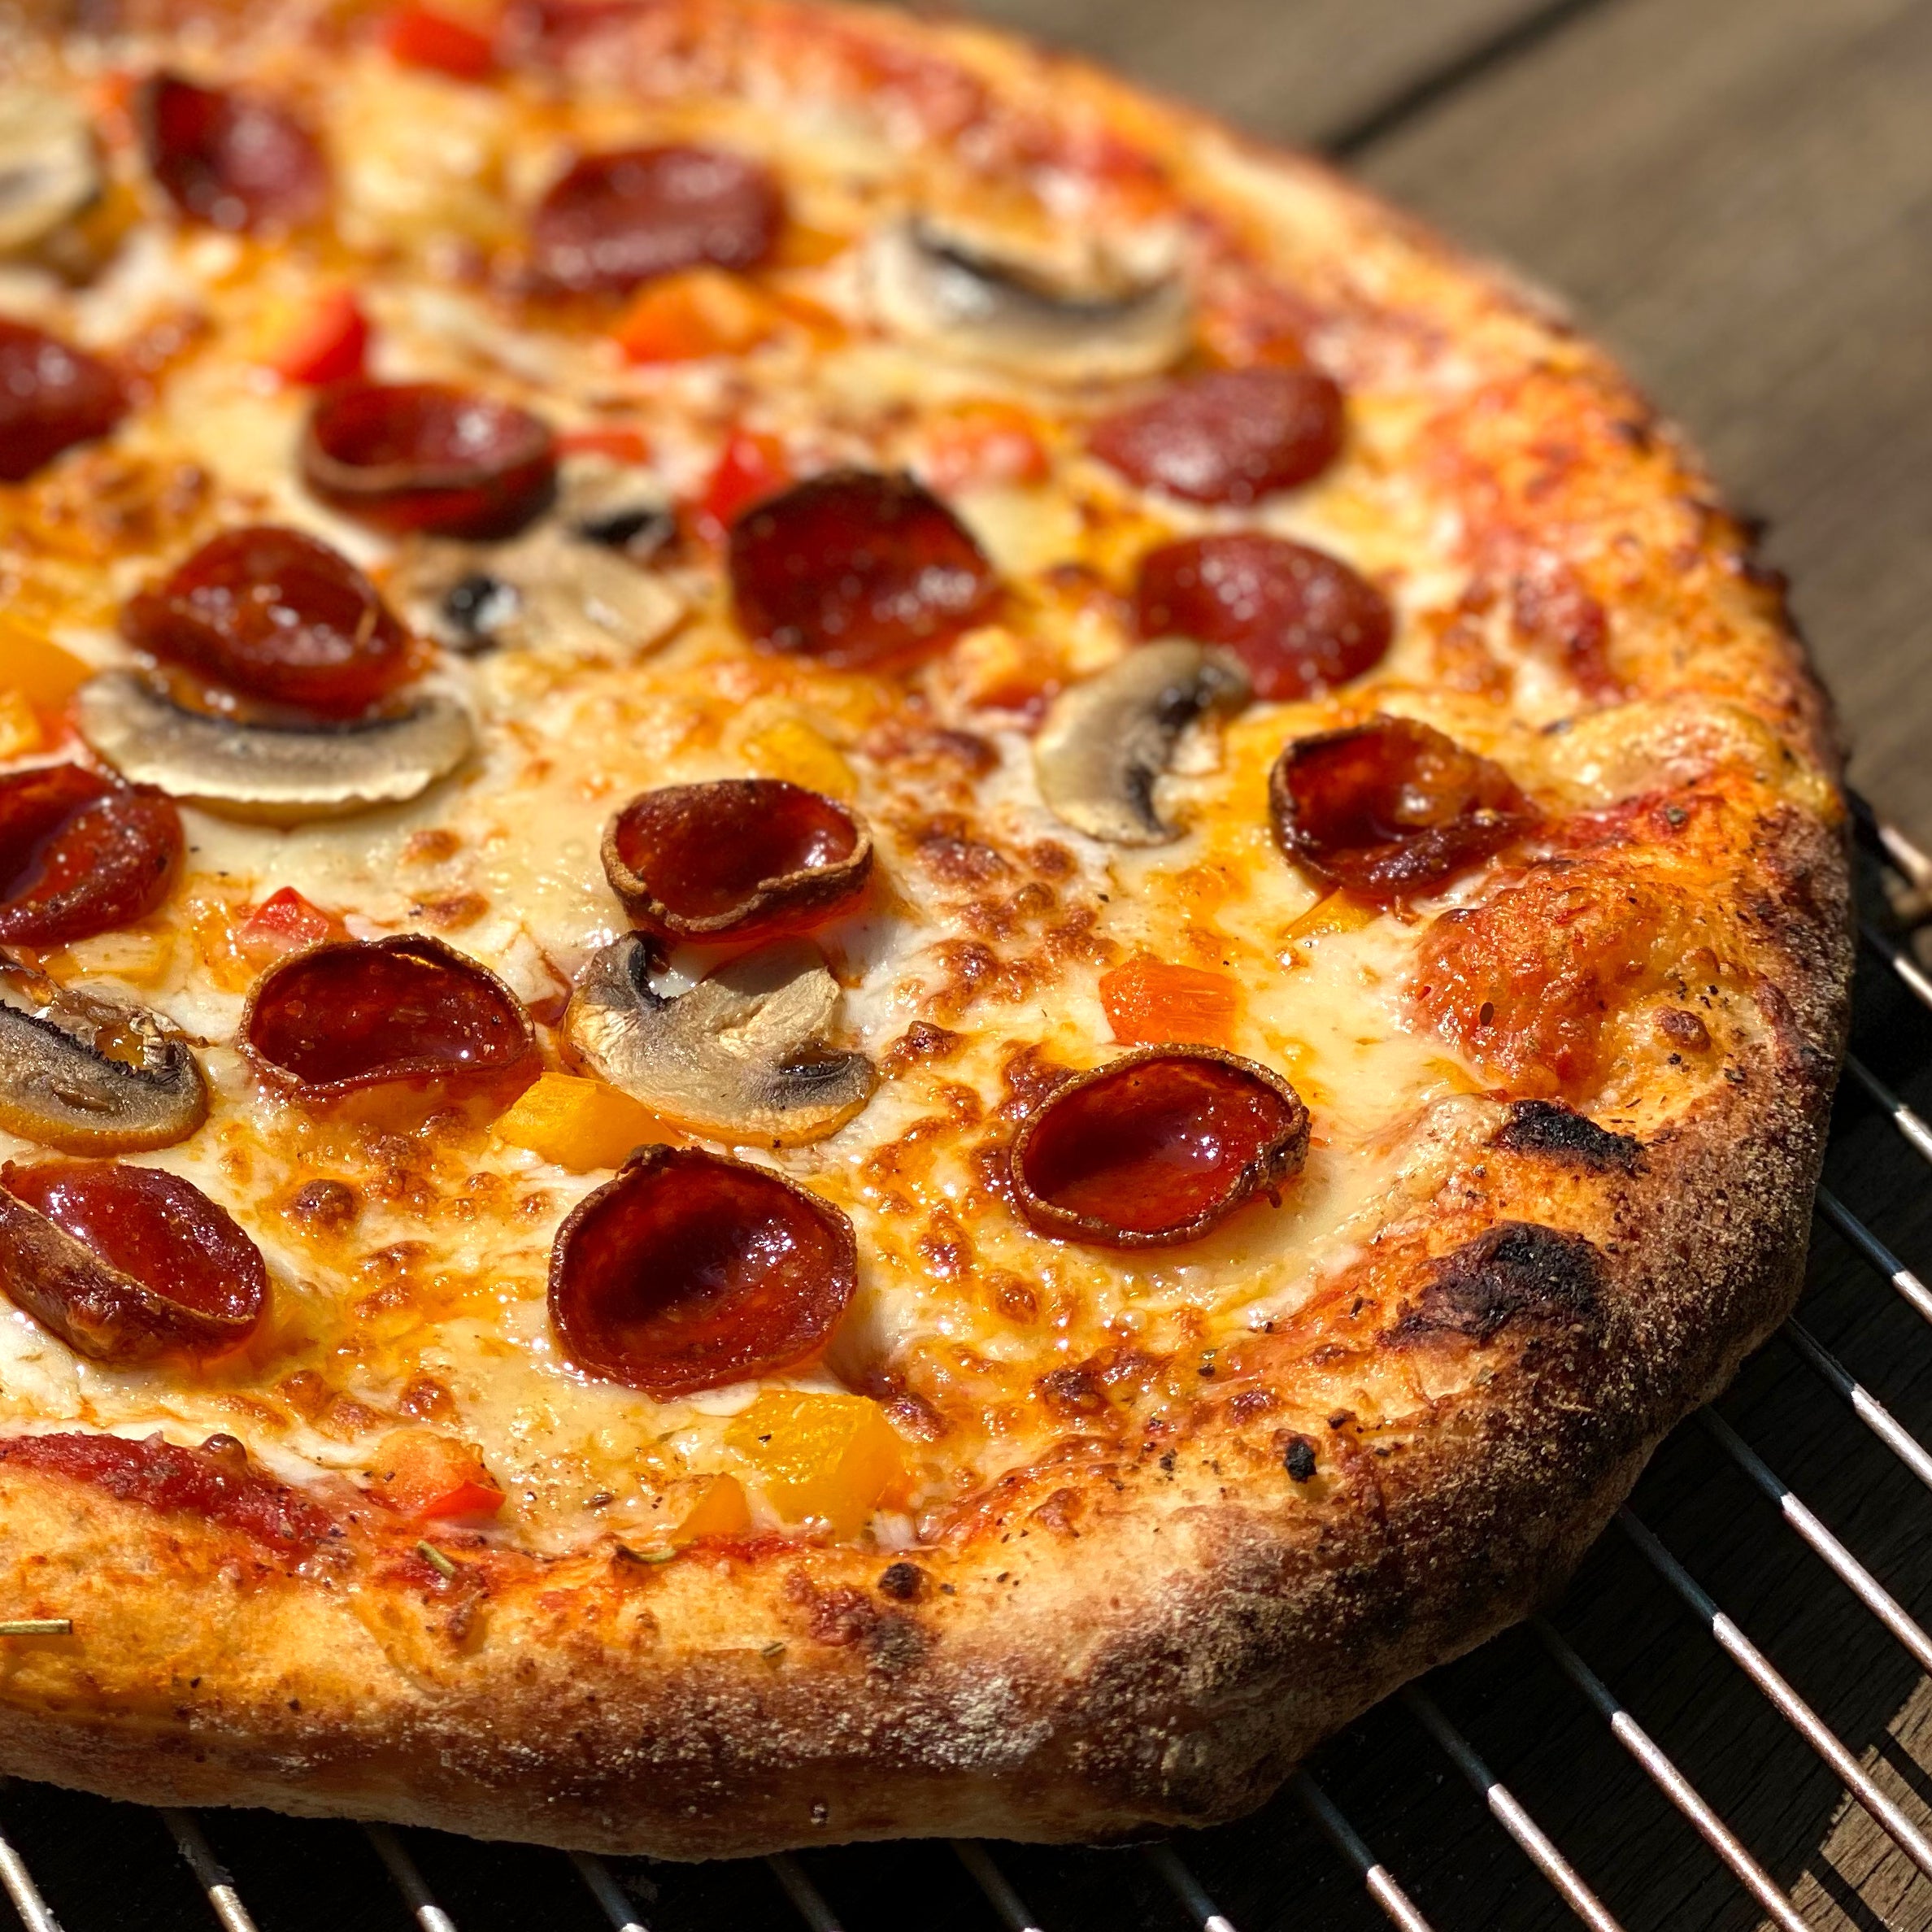 Spicy Cupping Pepperoni